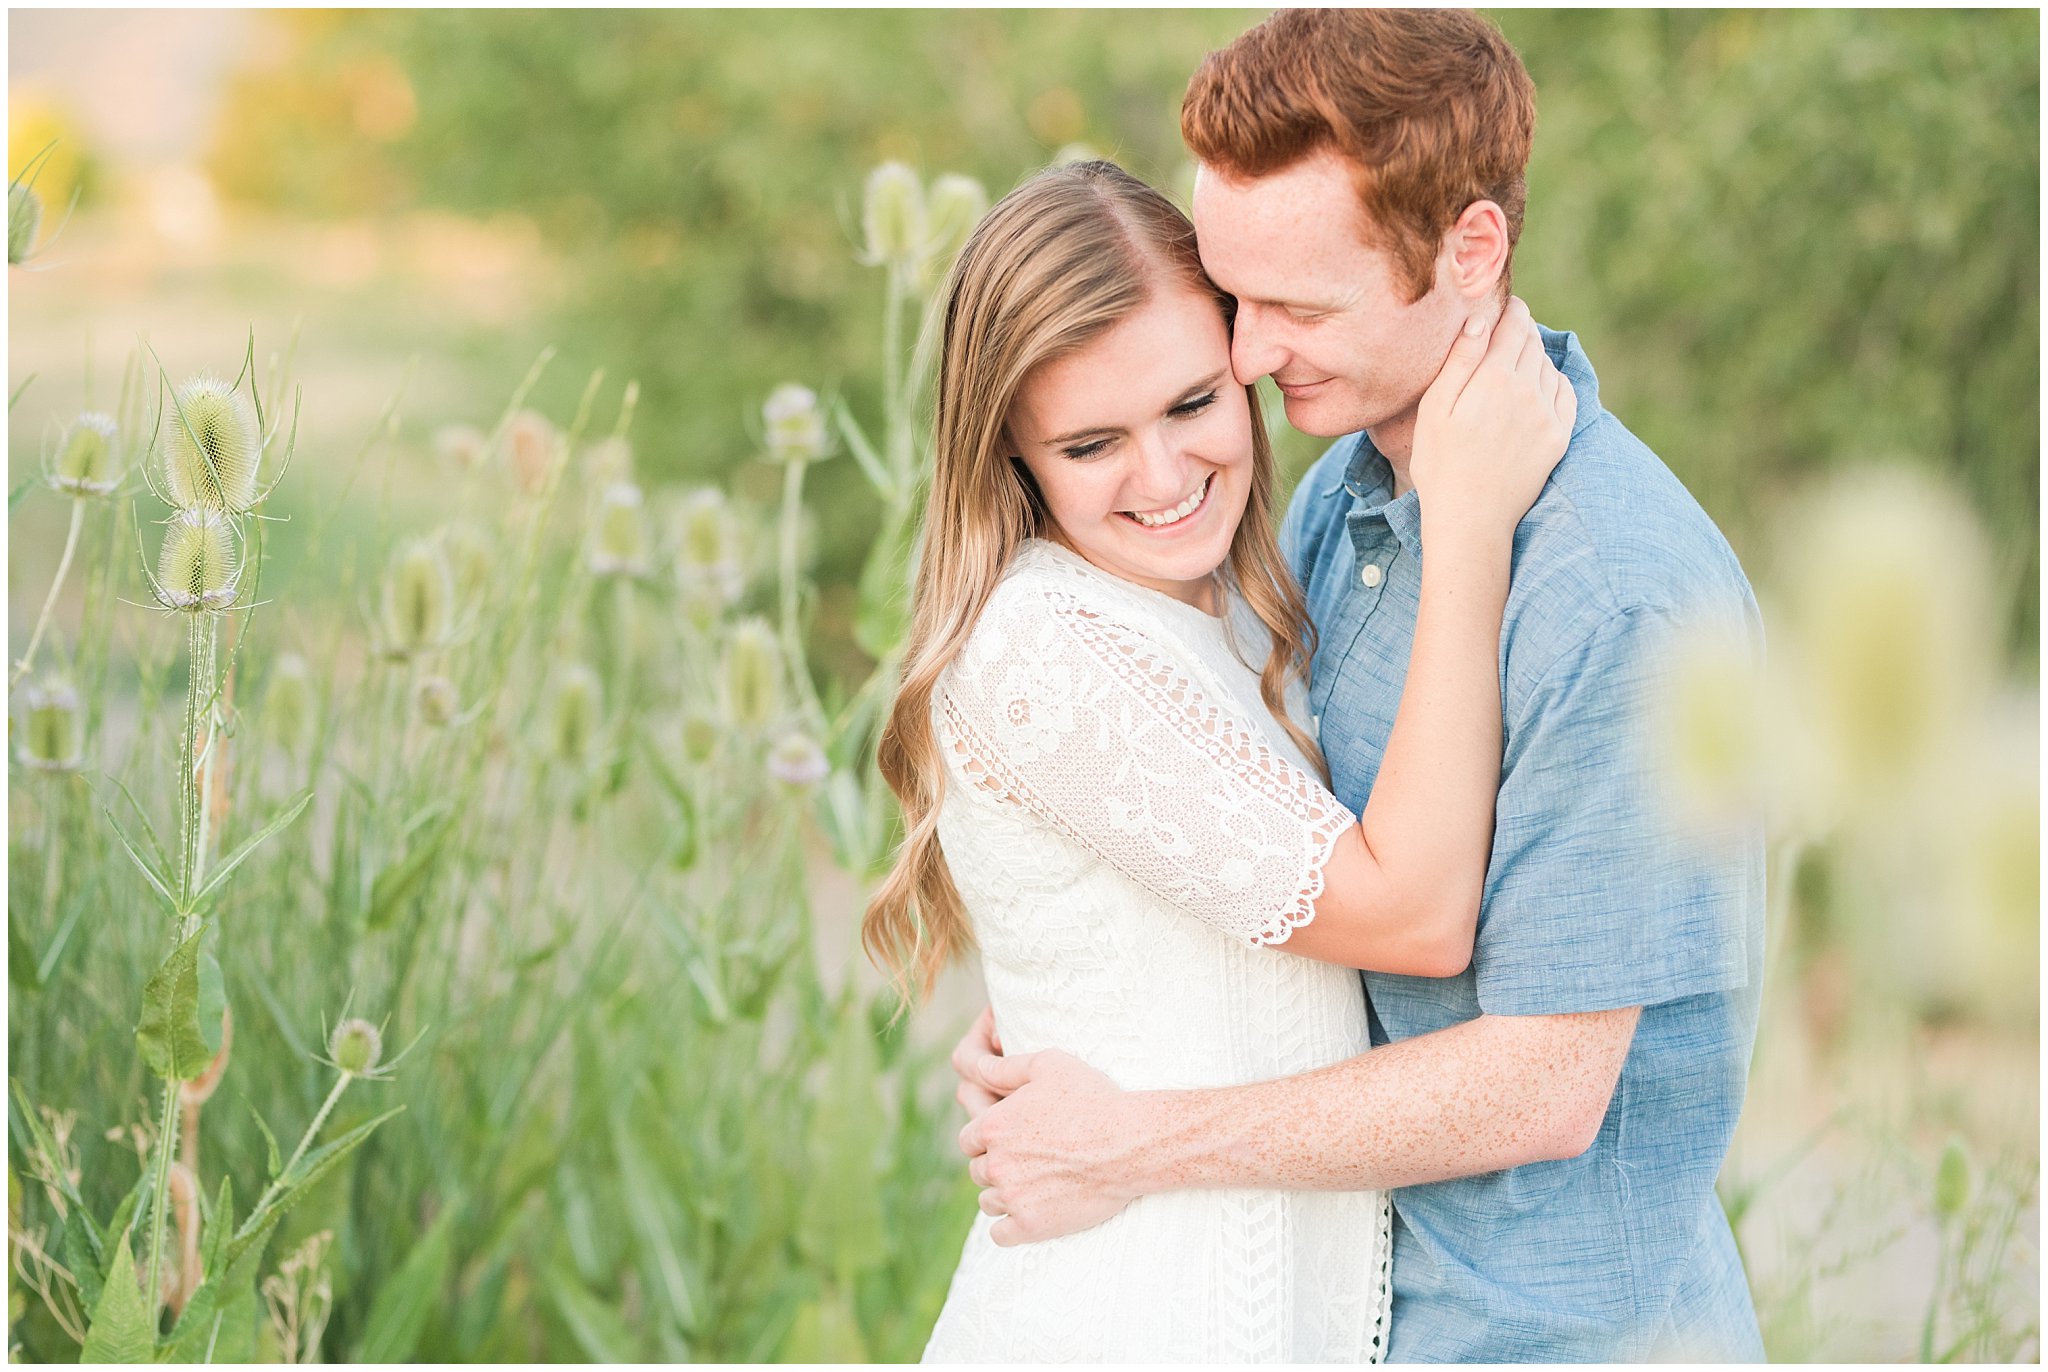 Couple wearing a white lace dress and light blue shirt during candid engagement photos in at a pond with a dock | Kaysville Botanical Garden Engagement | Utah Engagement | Jessie and Dallin Photography